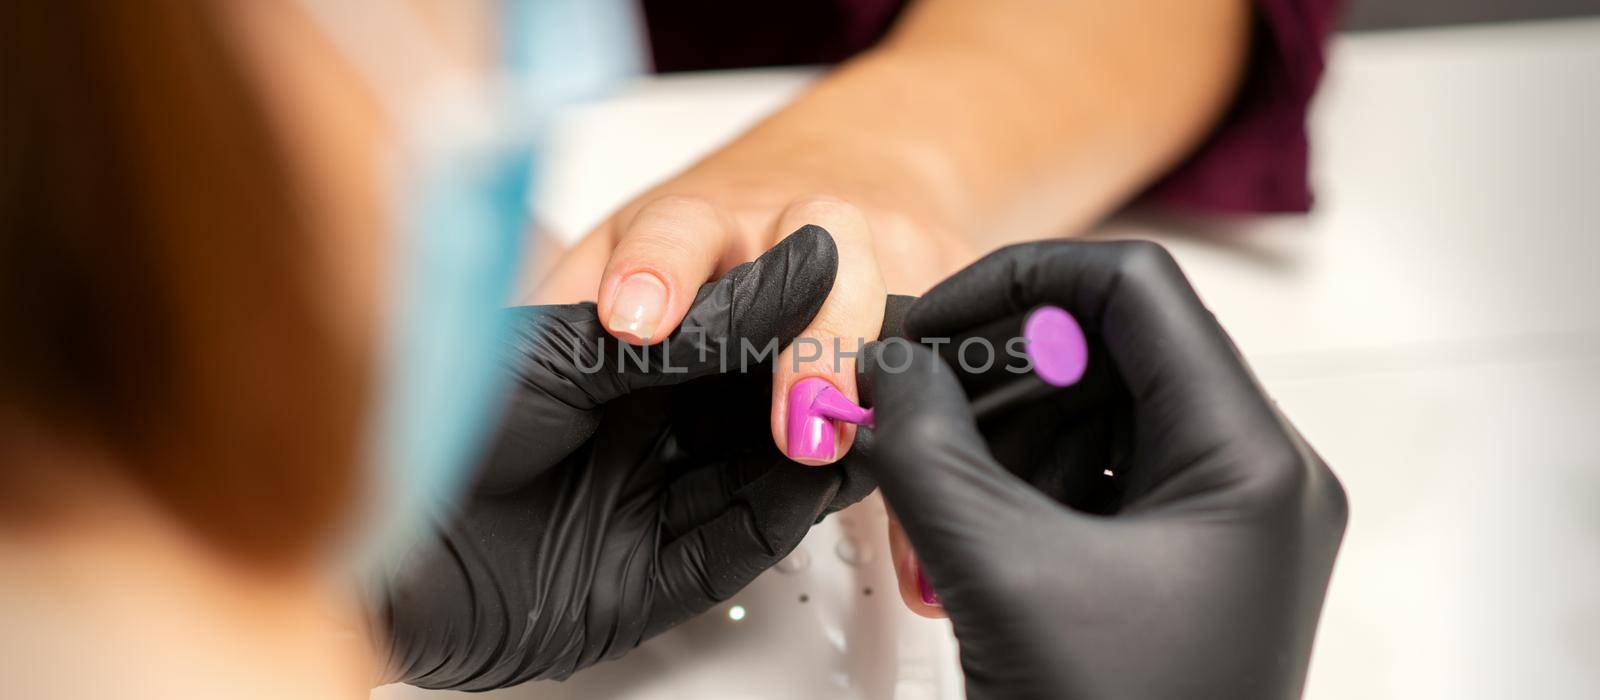 Painting nails of a woman. Hands of Manicurist in black gloves applying pink nail polish on female Nails in a beauty salon. by okskukuruza